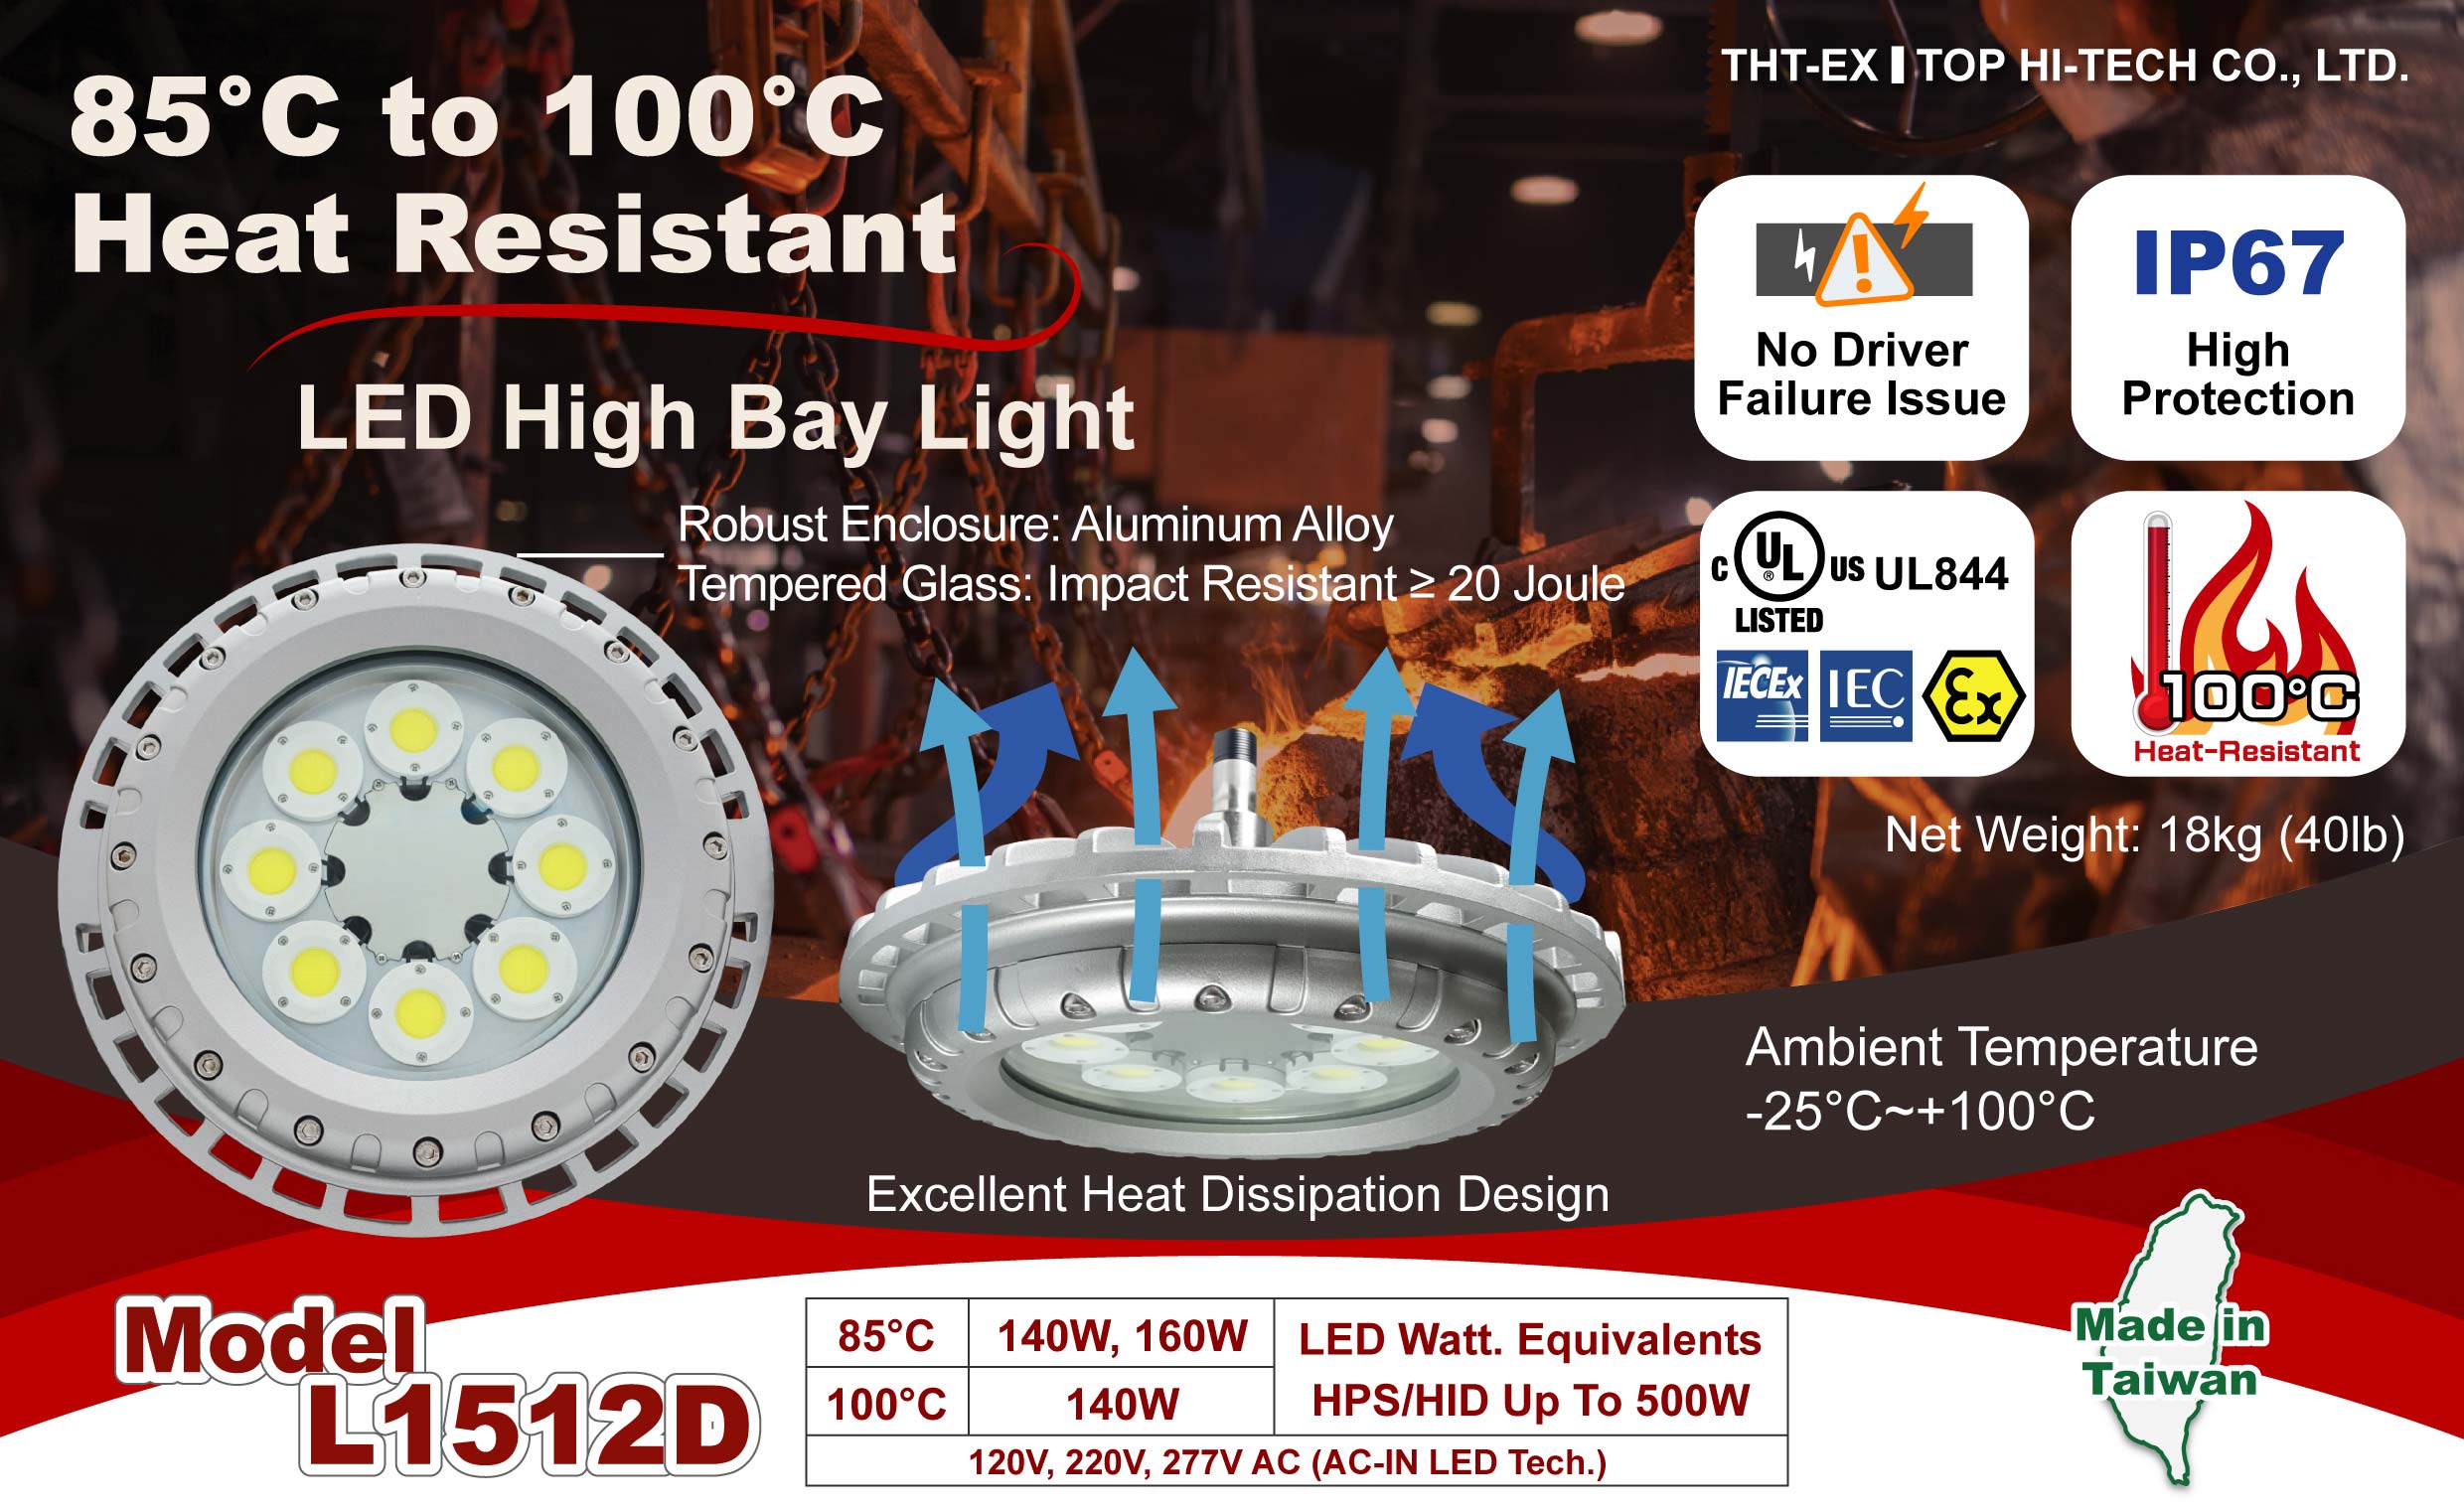 Heat Resistant LED High Bay Light - Excellent Heat Dissipation, No Driver Overheating Problem!